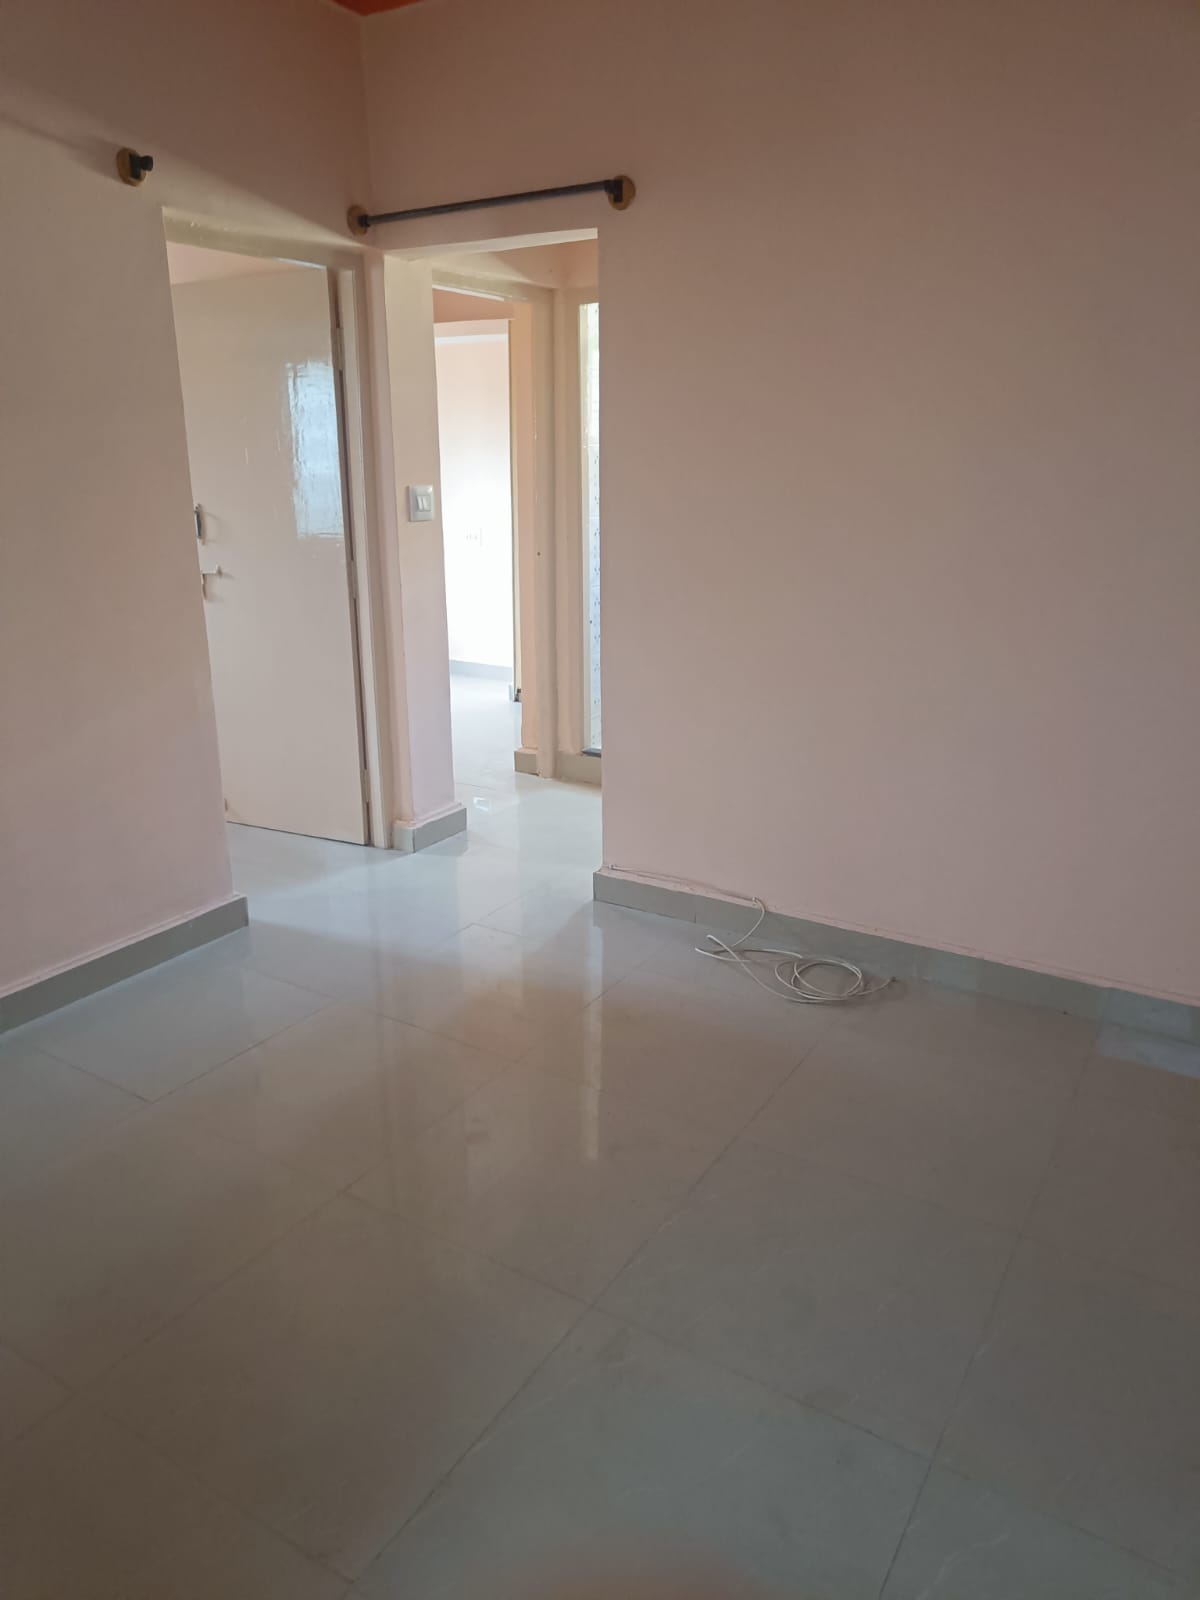 3 BHK Independent House for Lease Only at JAML2 - 4346 in Varthur